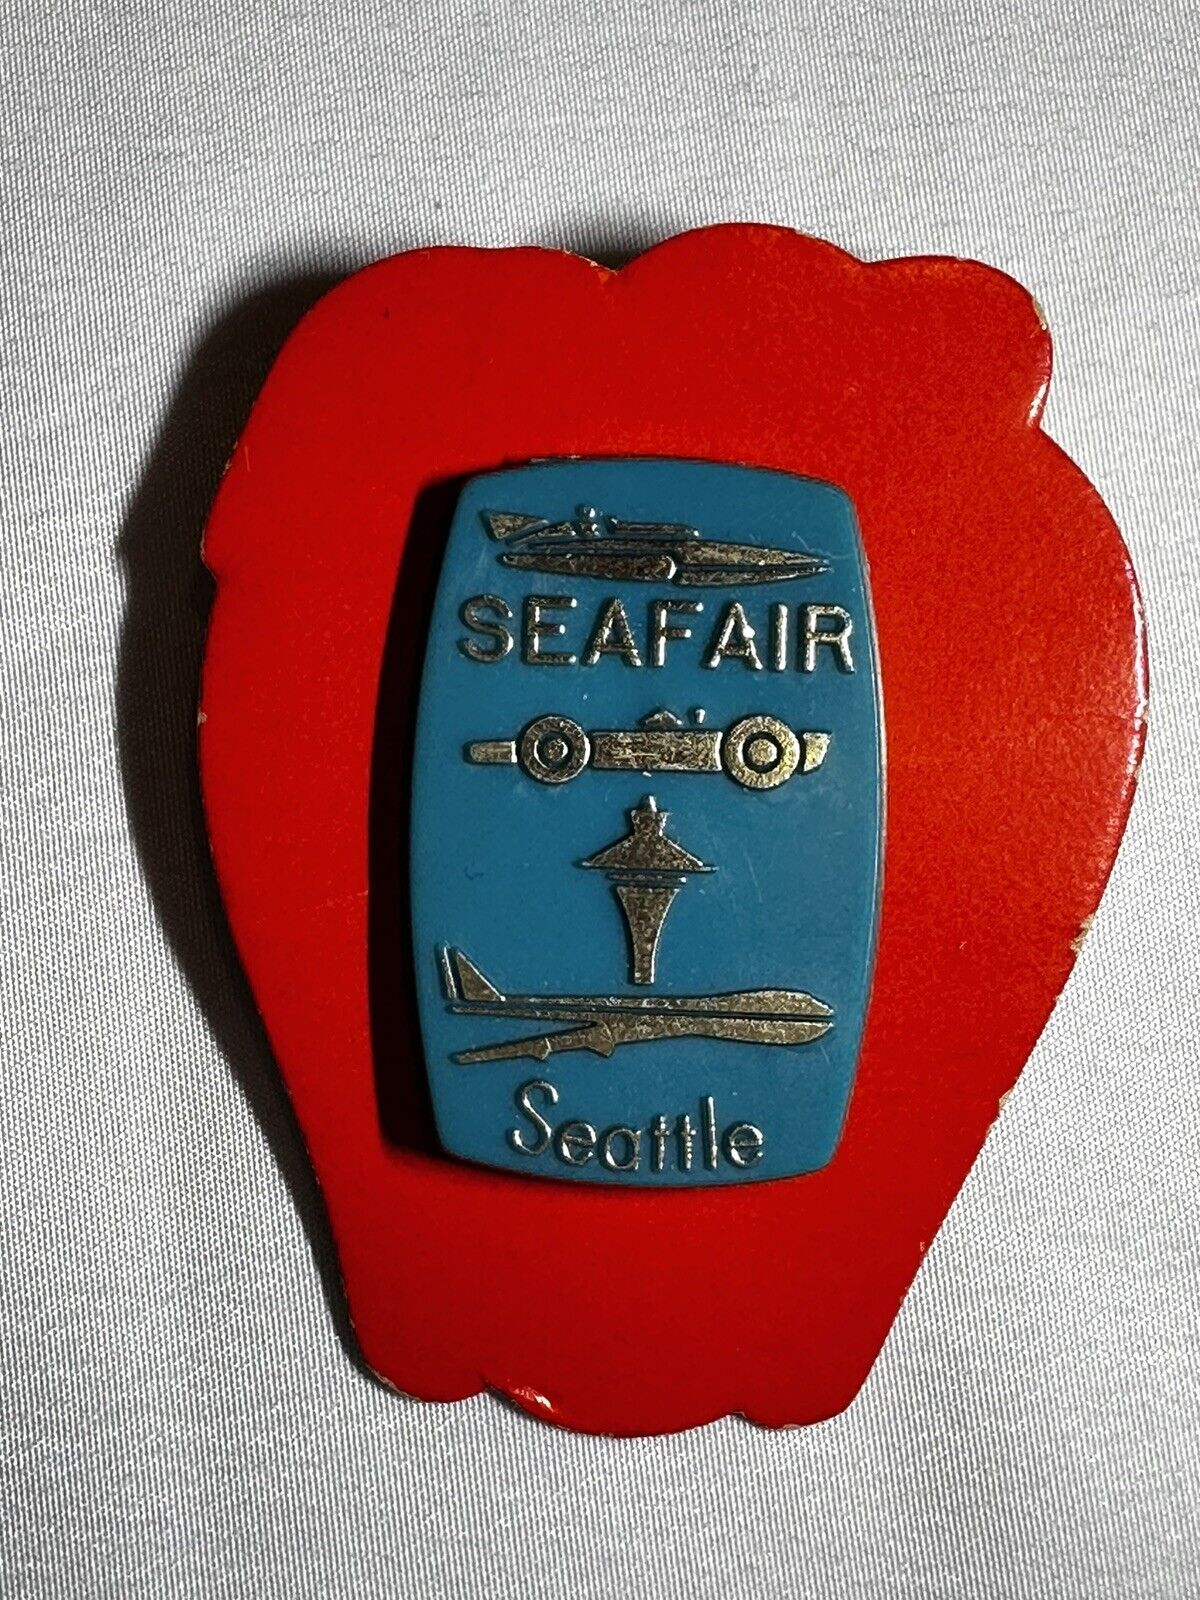 1971 Seattle Seafair Plastic Pin Never Removed From Backing Vintage Souvenir